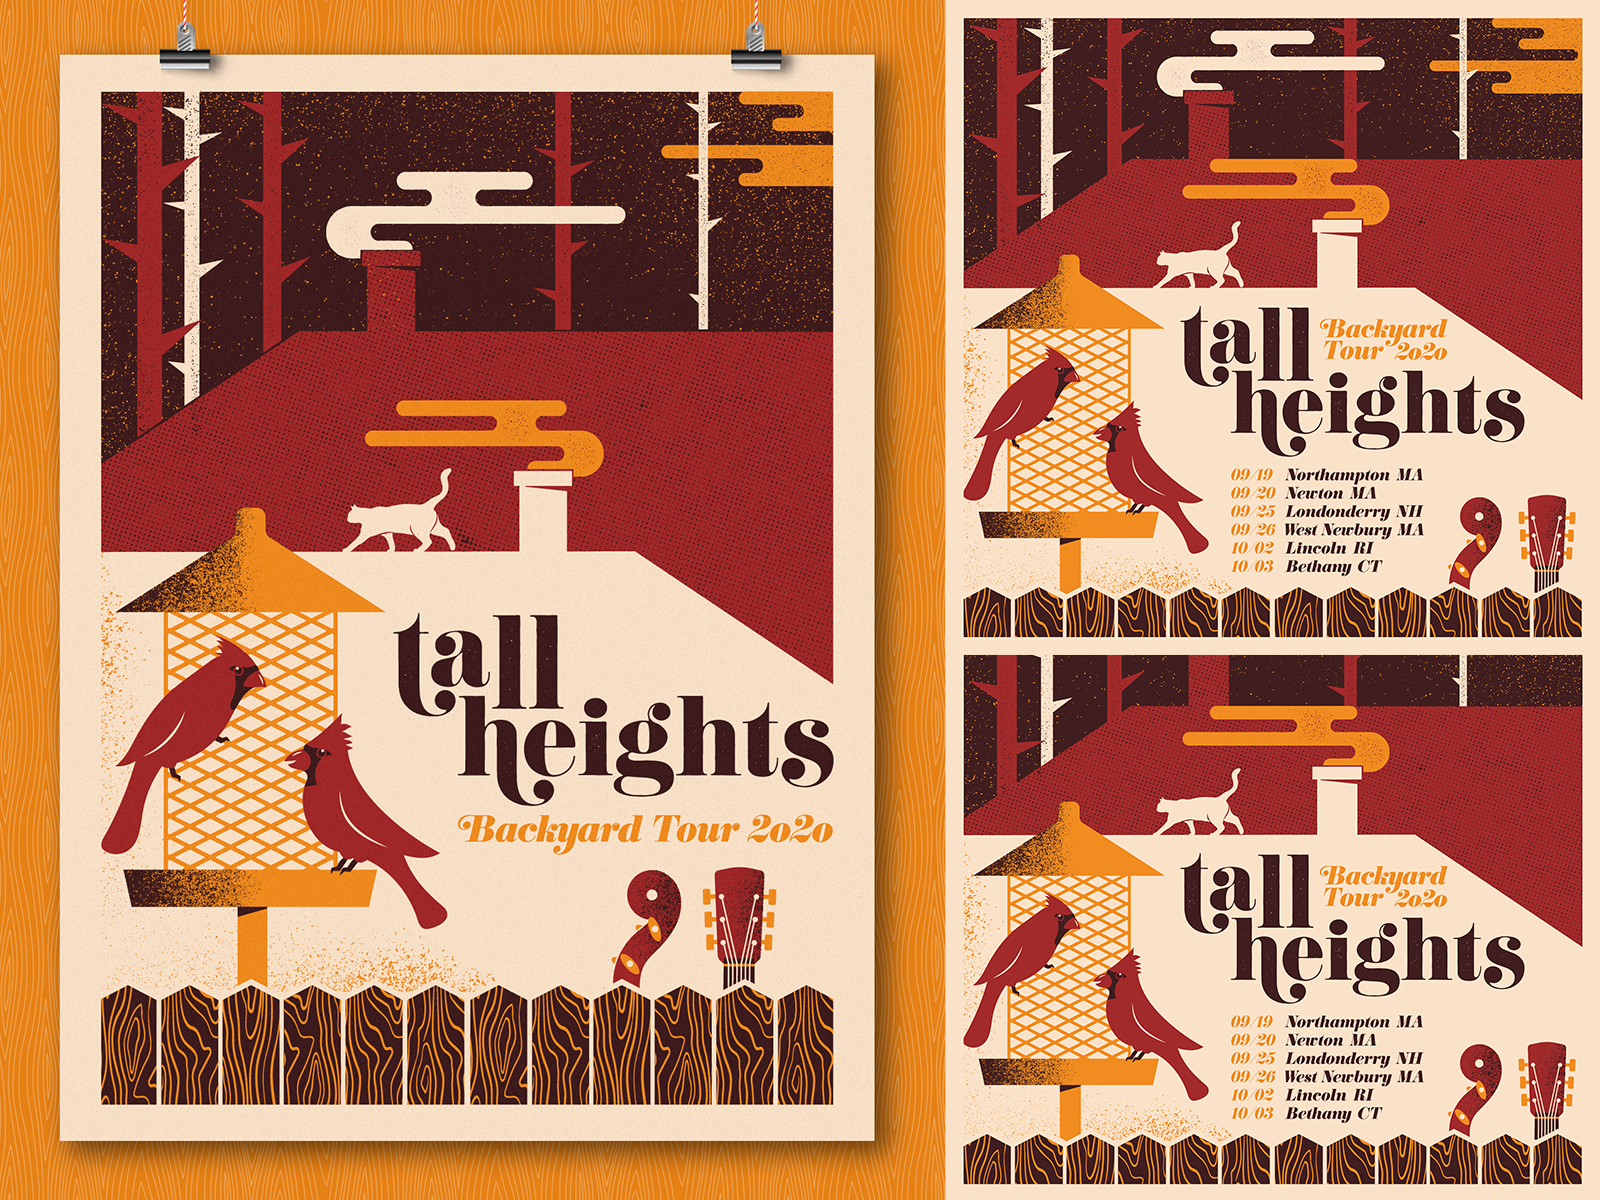 Tall Heights Tour Poster by Daniel Hawkins on Dribbble